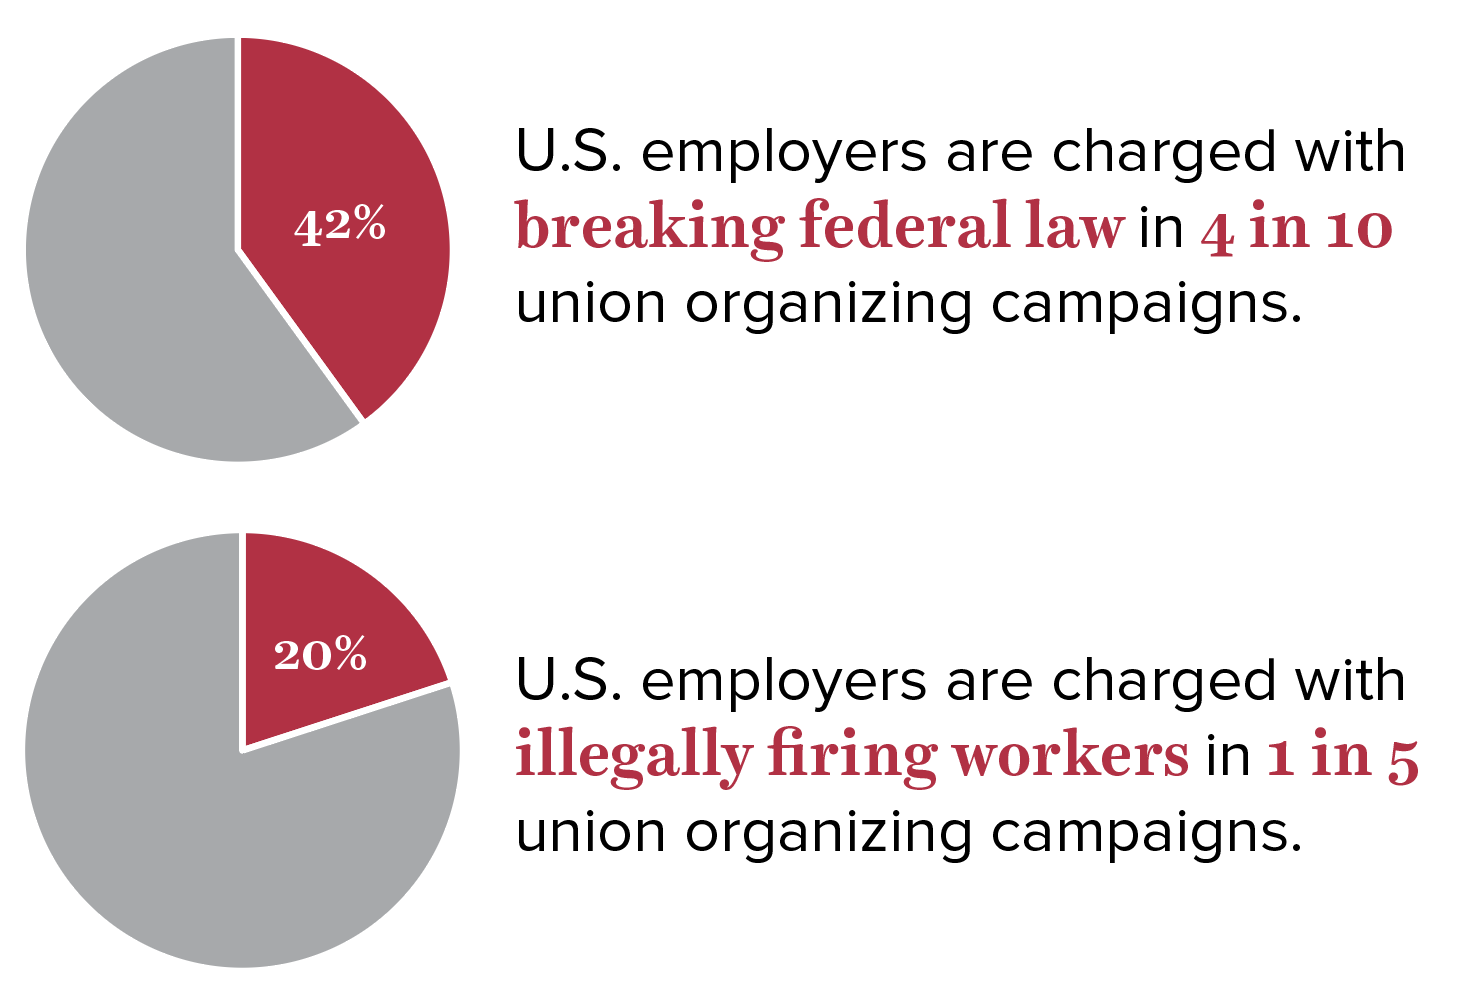 Employers routinely fire workers and use other illegal tactics to thwart workers’ efforts to unionize